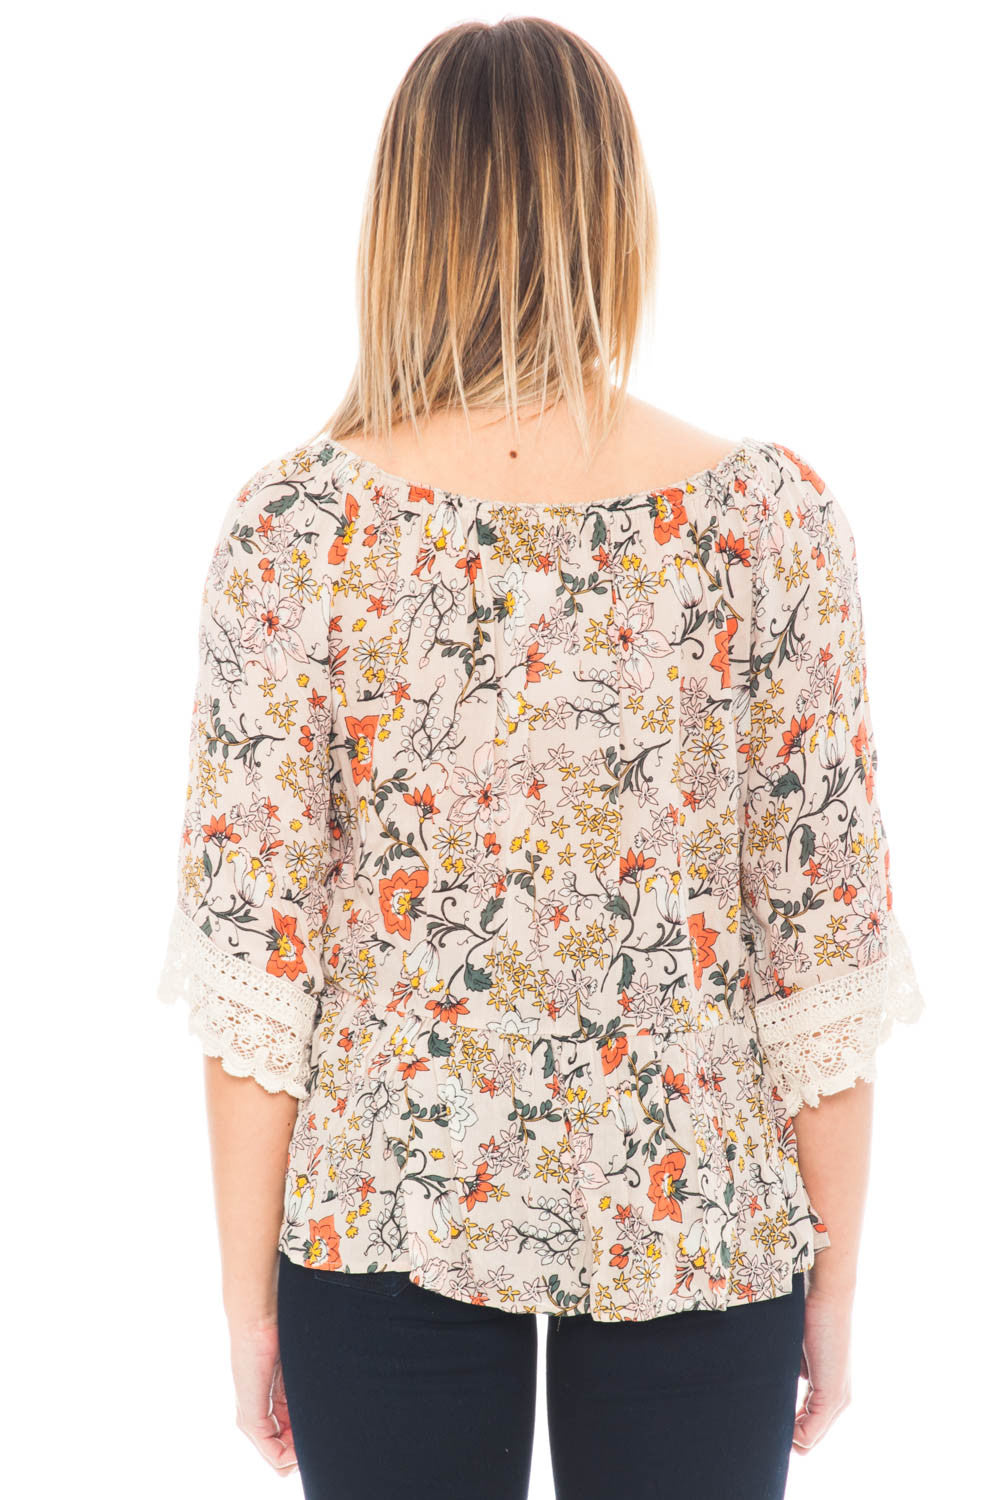 Blouse - Floral Peasant Top with a Bell Sleeve by Democracy